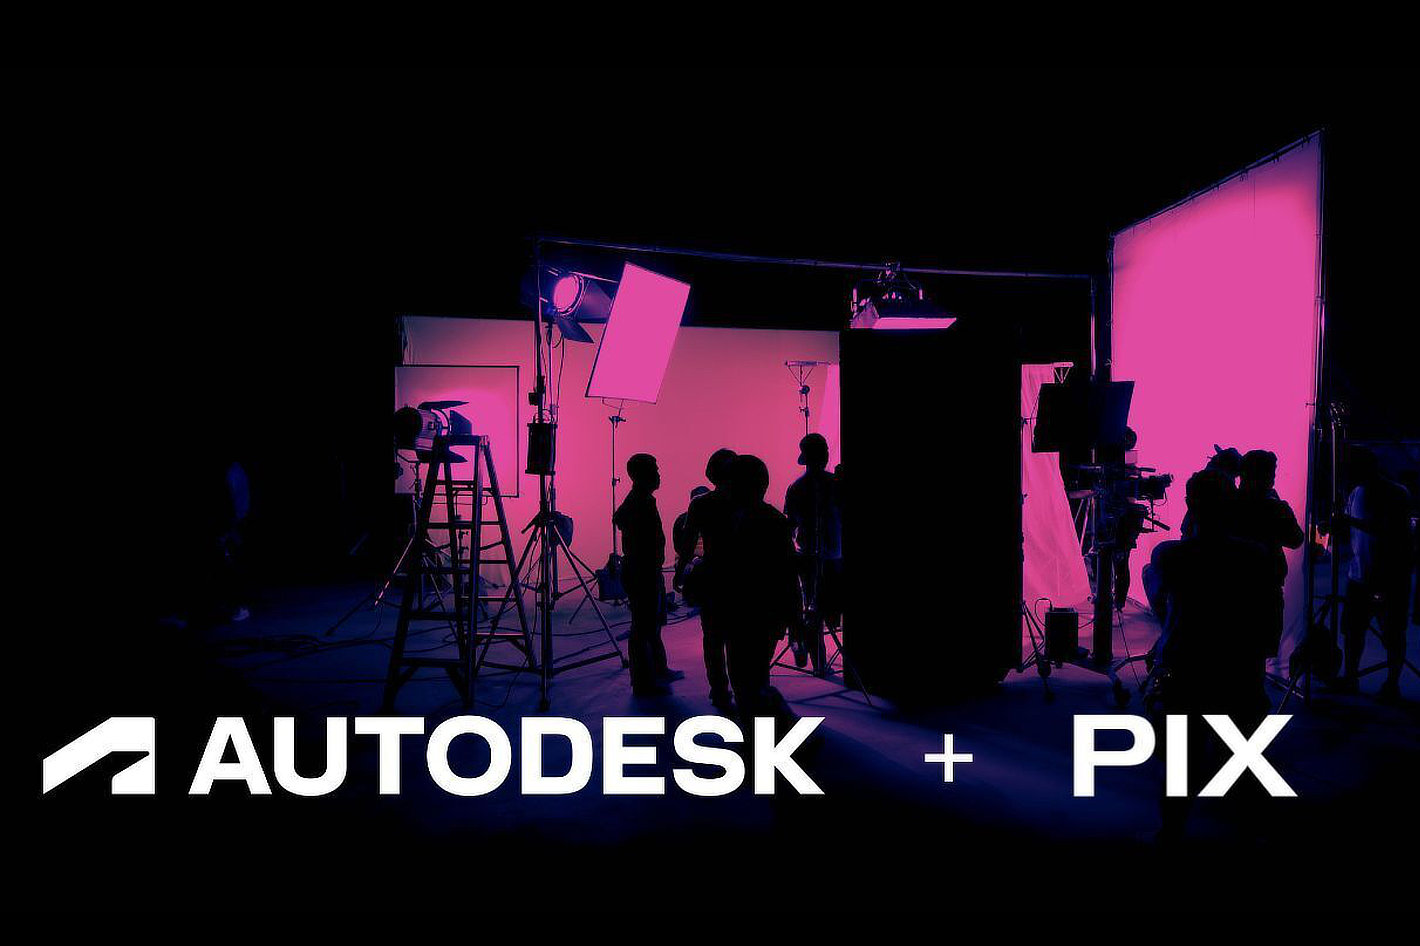 Autodesk acquires PIX, expands presence in on-set production